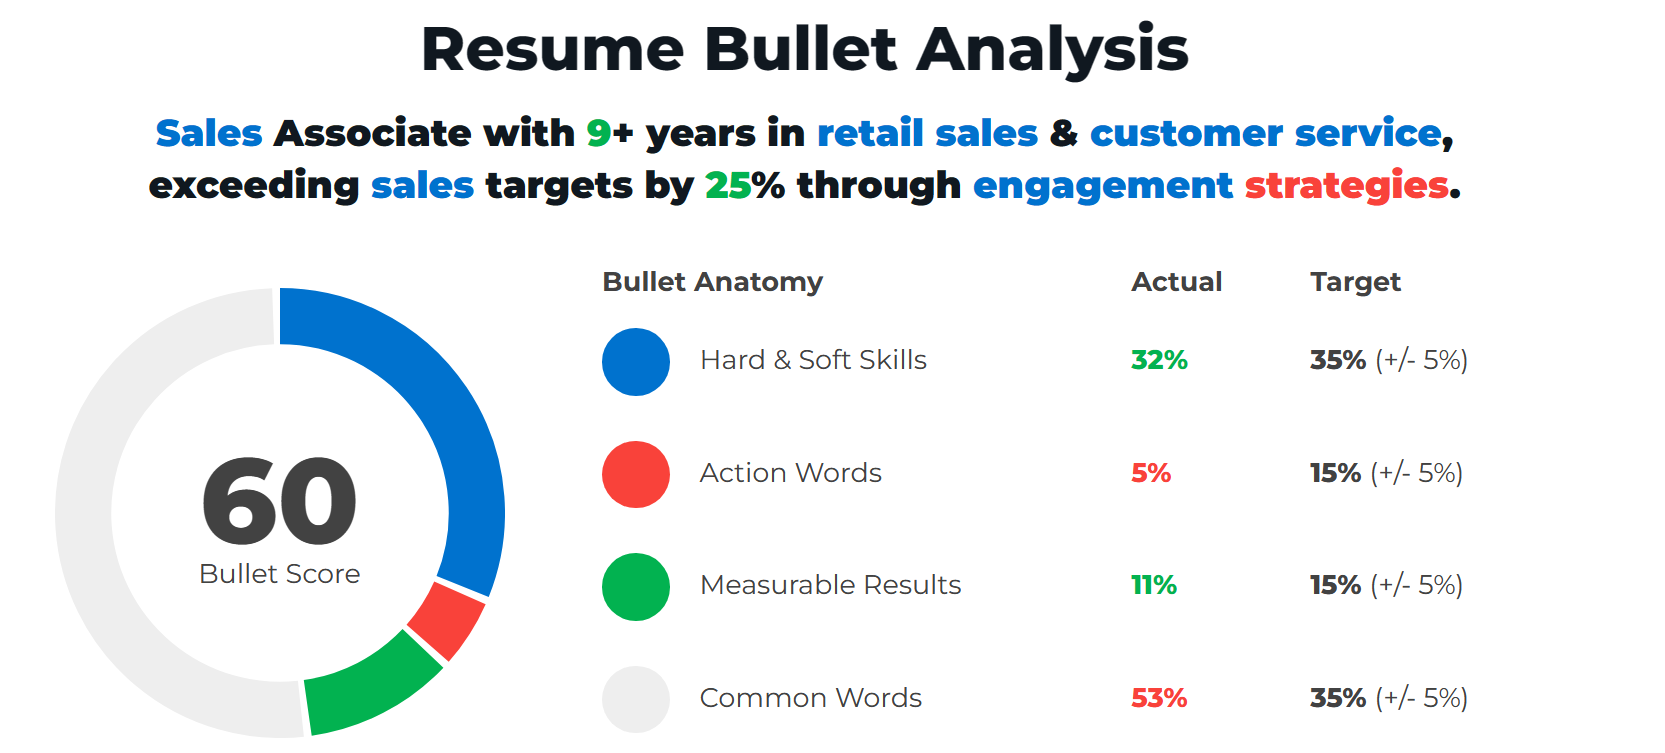 Example Of A Good Sales Associate Resume Summary Bullet